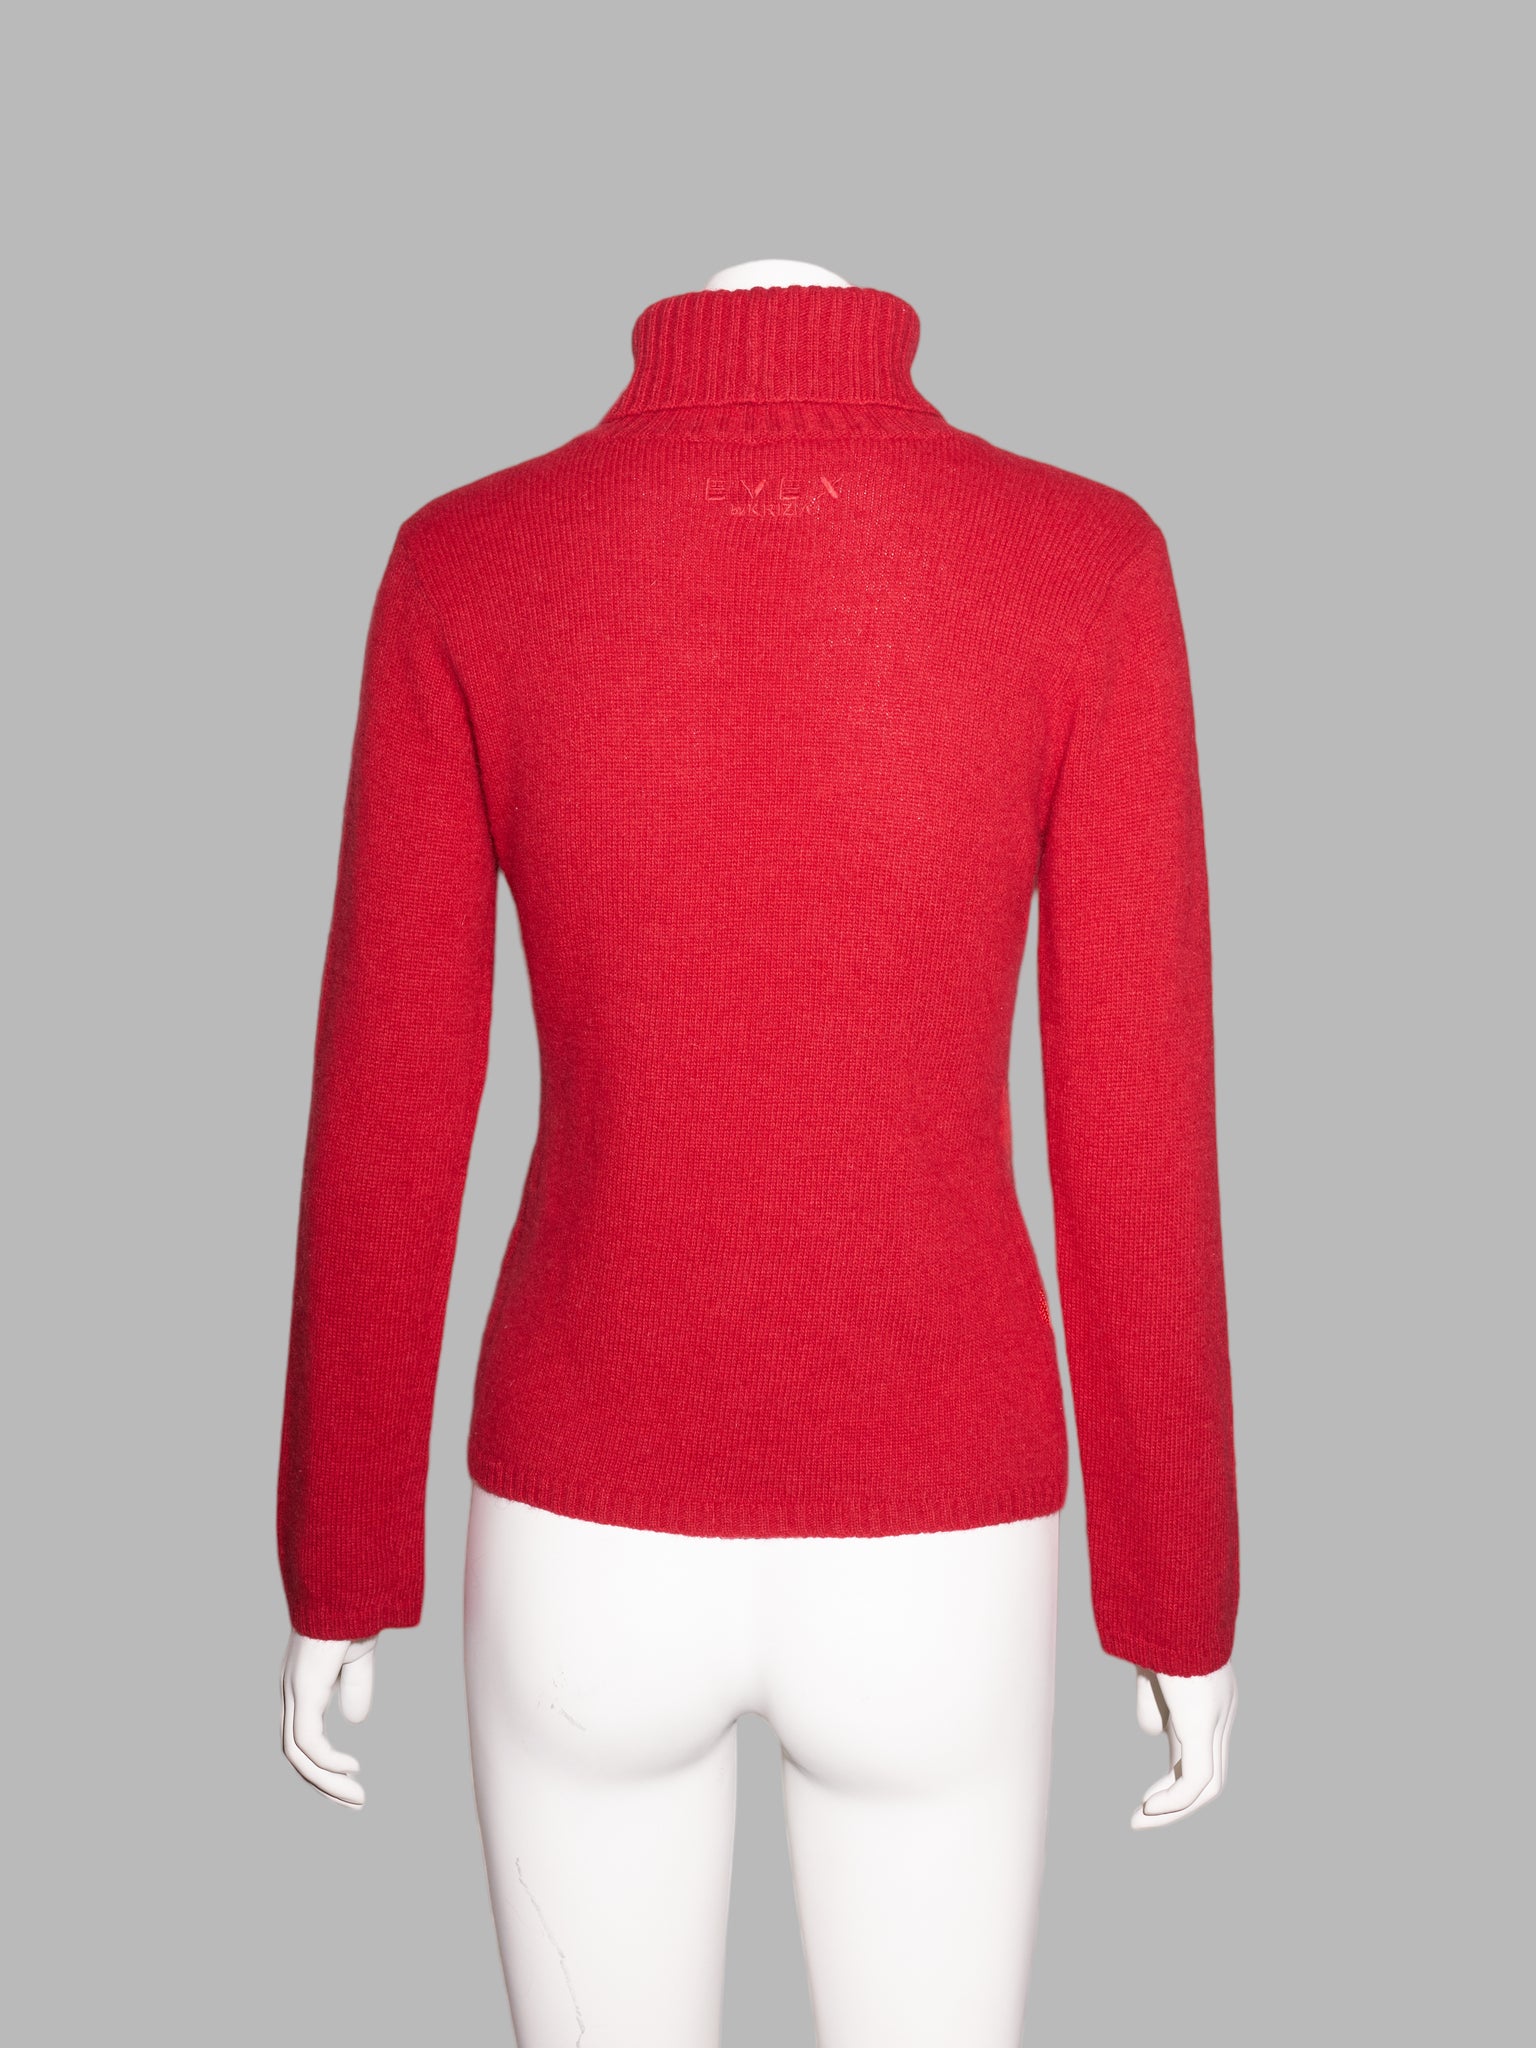 Evex by Krizia red wool turtleneck jumper with flower pattern - size 40